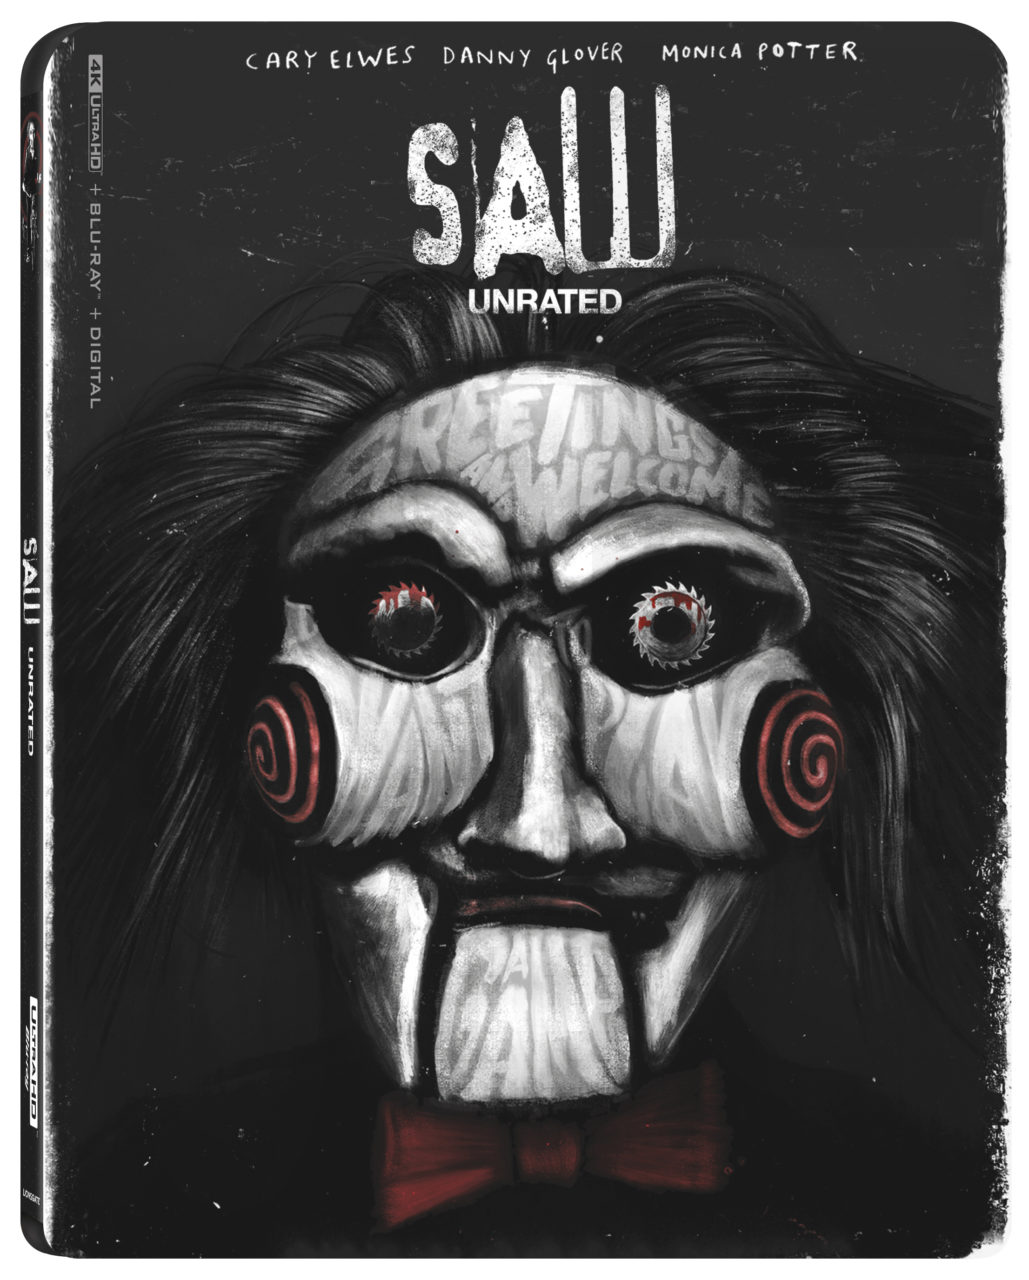 Saw Unrated Blu-Ray Combo Pack cover (Lionsgate)